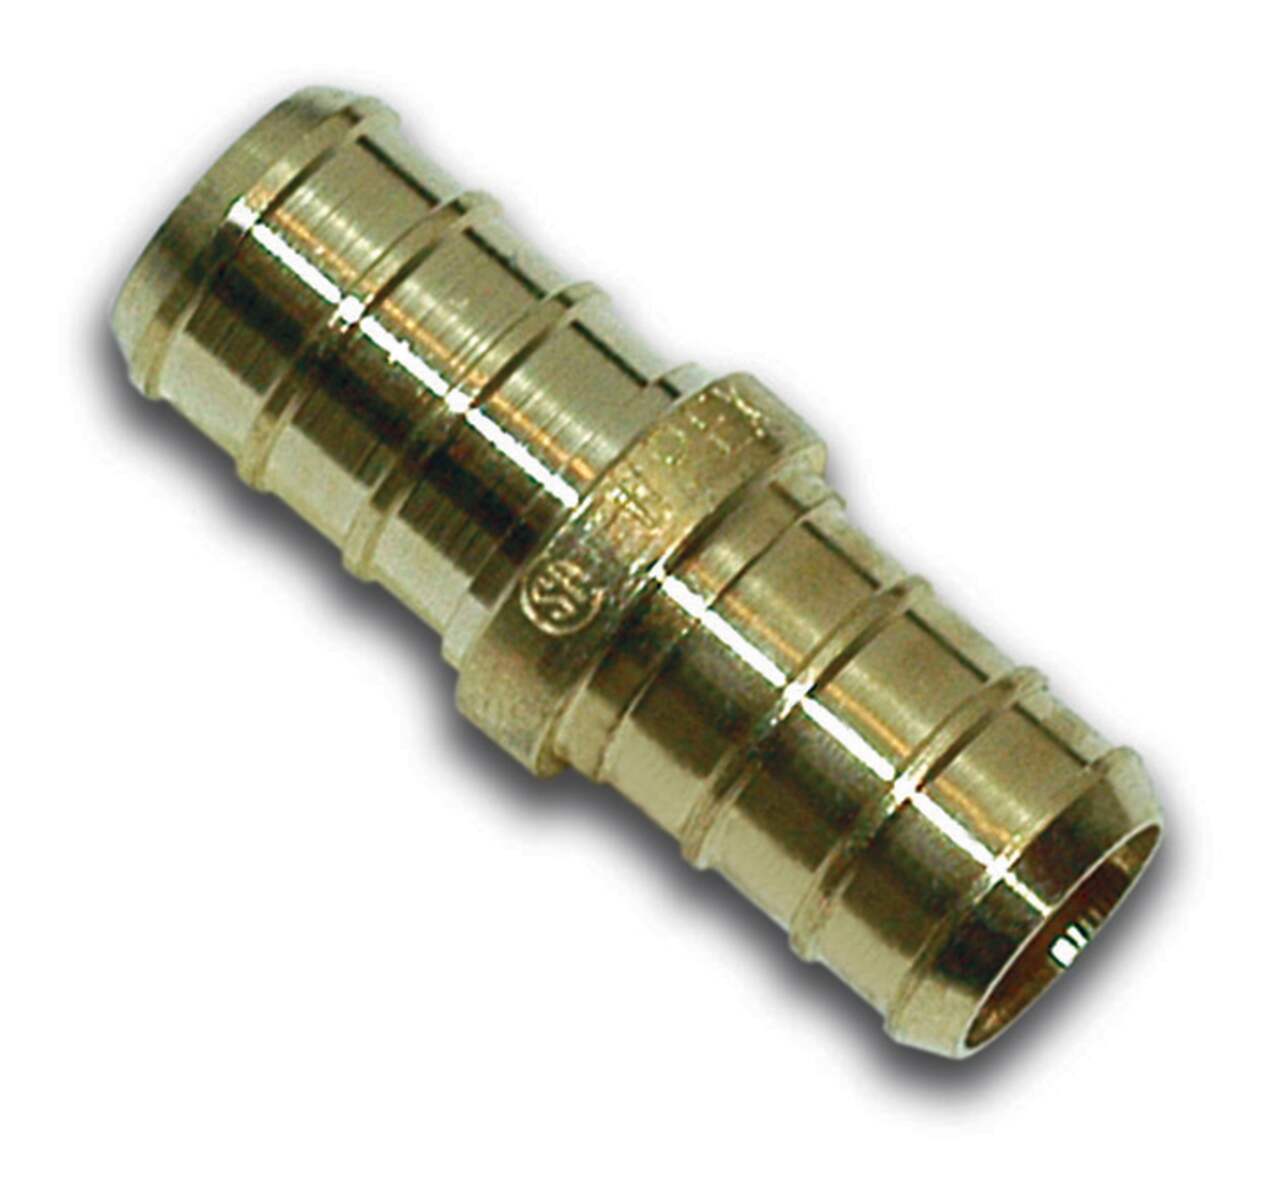 APPROVED VENDOR BRASS FITTING KIT,ASSORTED - Metal Pipe Fitting